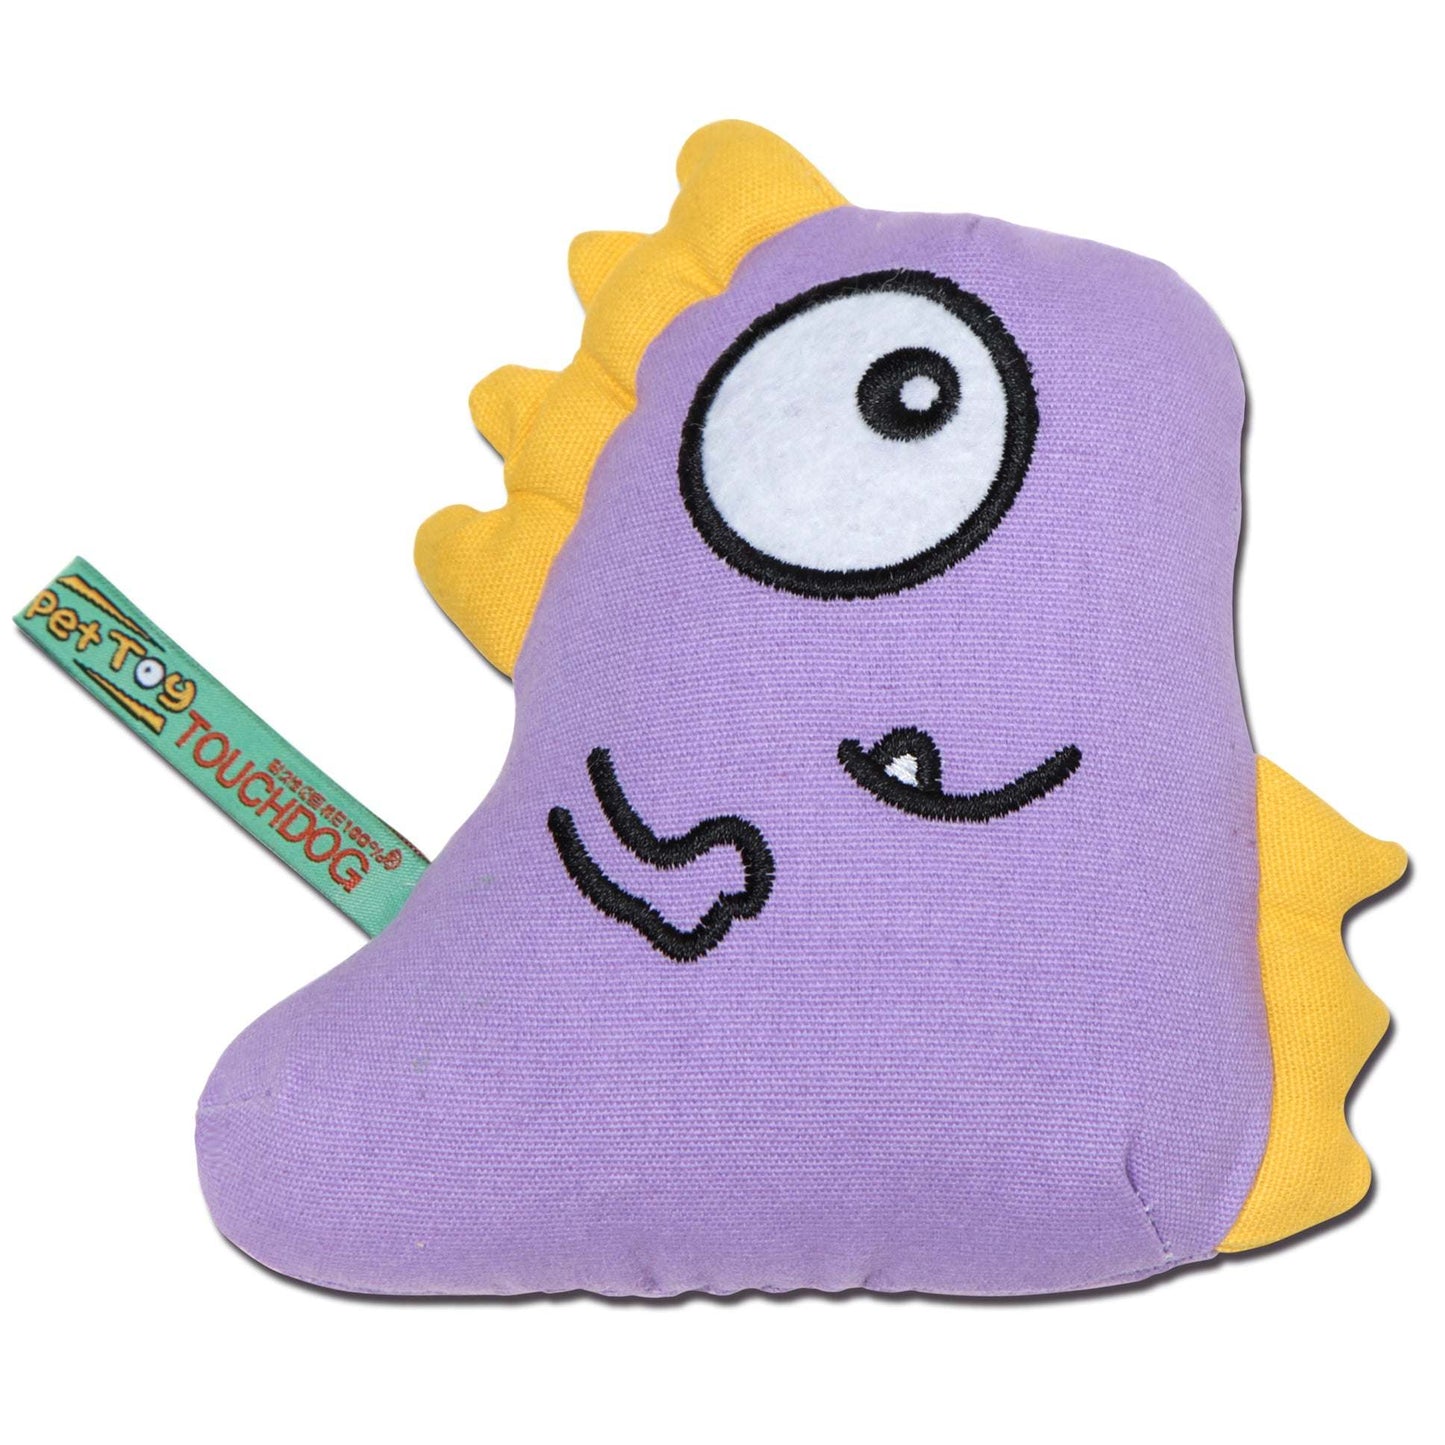 Shoe-Faced Monster Plush Toy